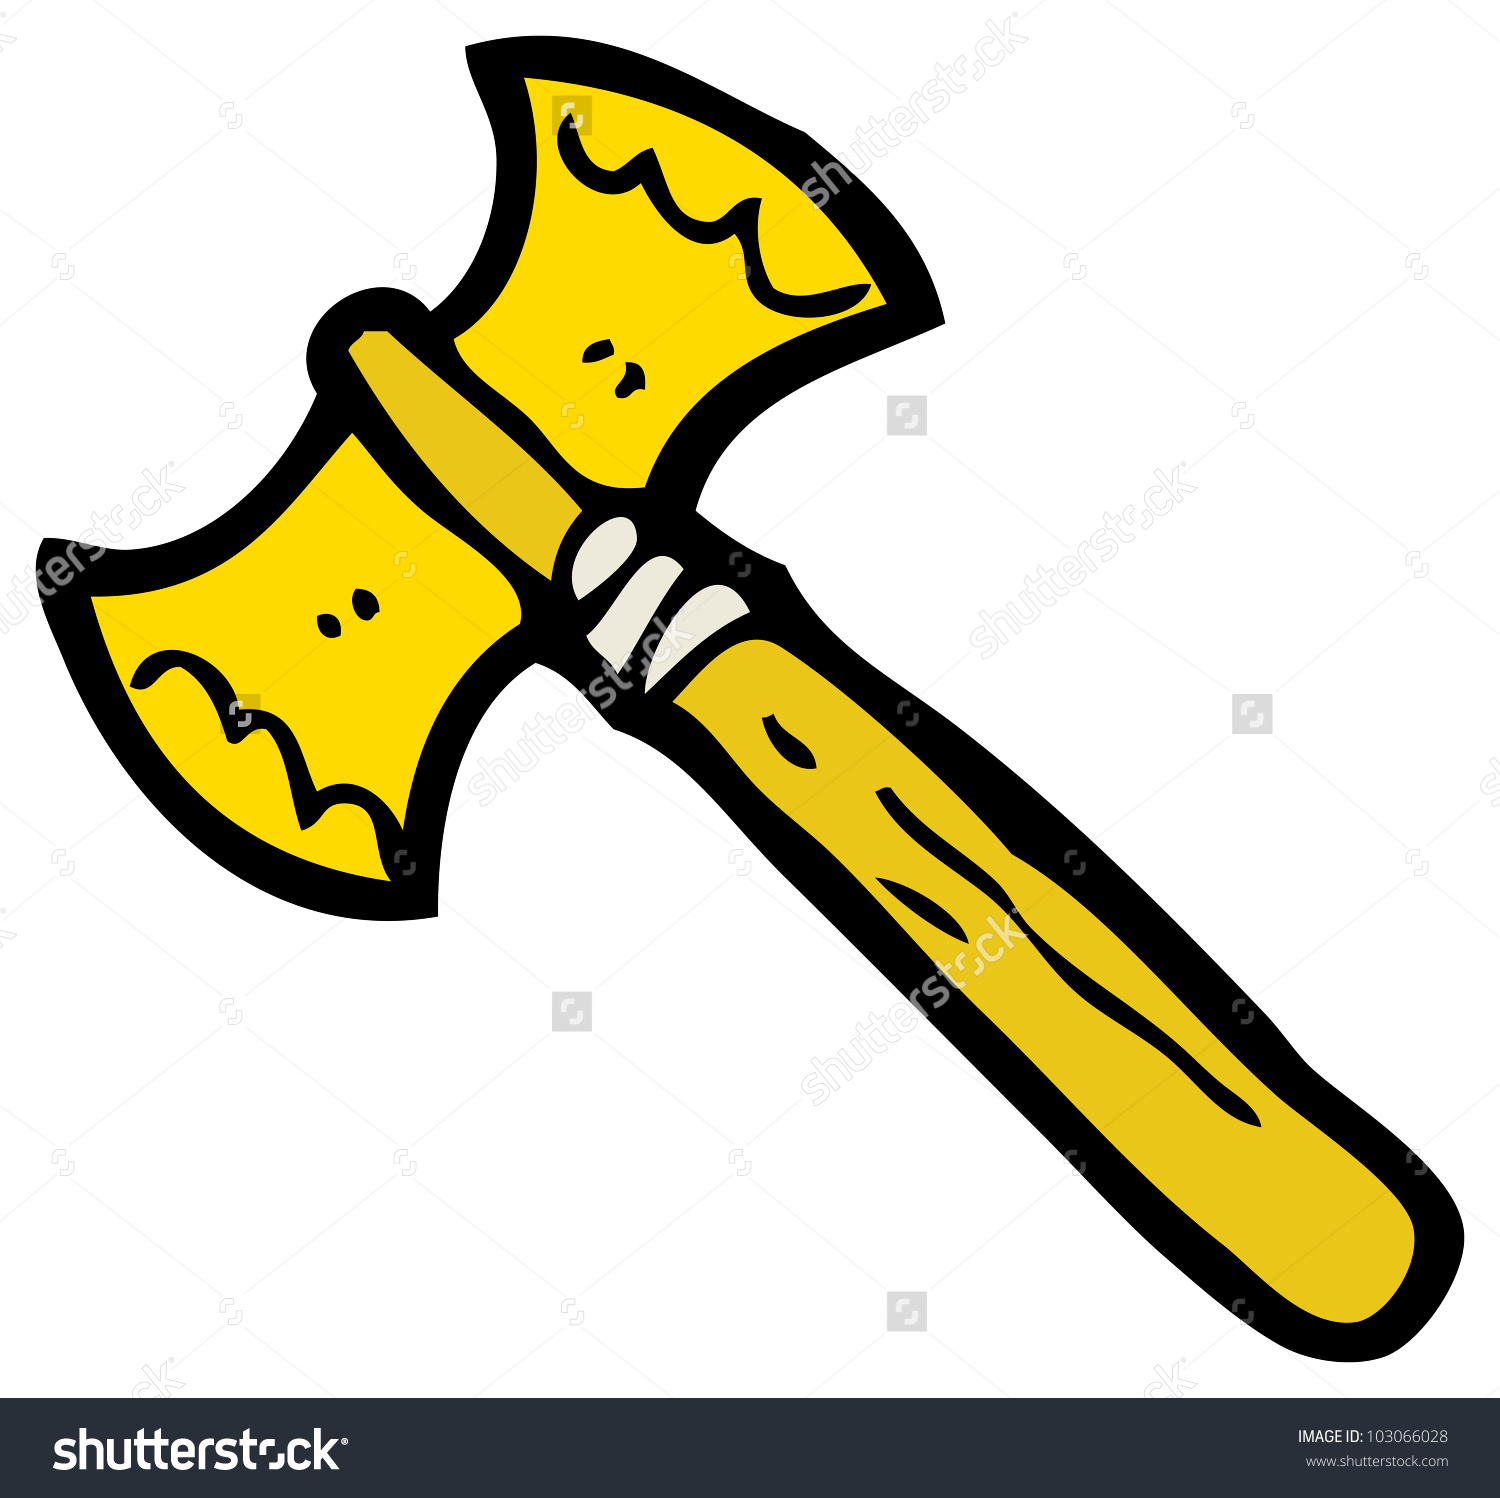 Axe clipart gold, Axe gold Transparent FREE for download on.